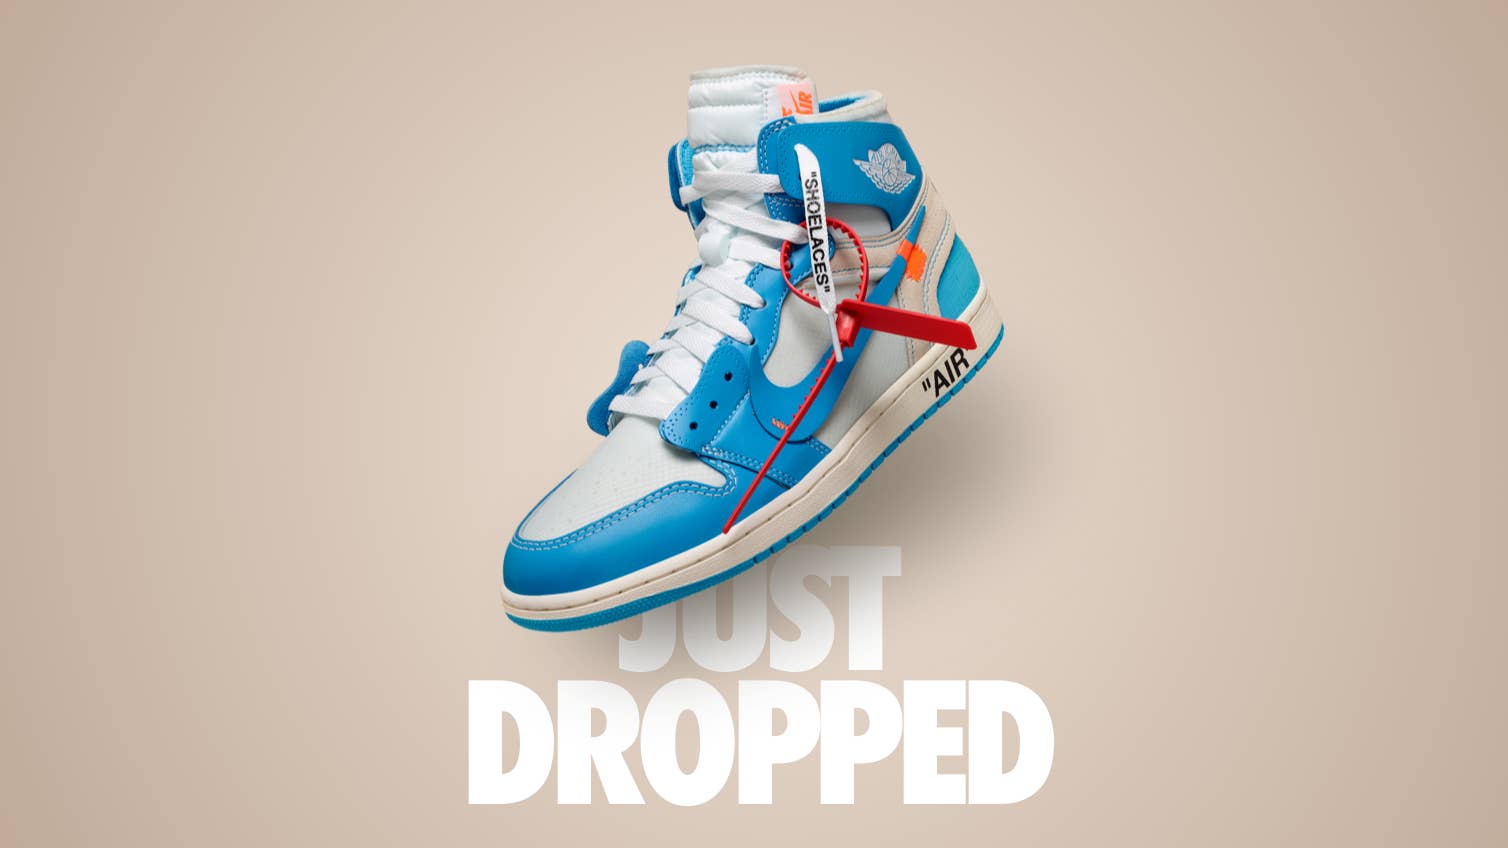 Nike Just Released the 'UNC' Off-White x Air Jordan 1 | Complex